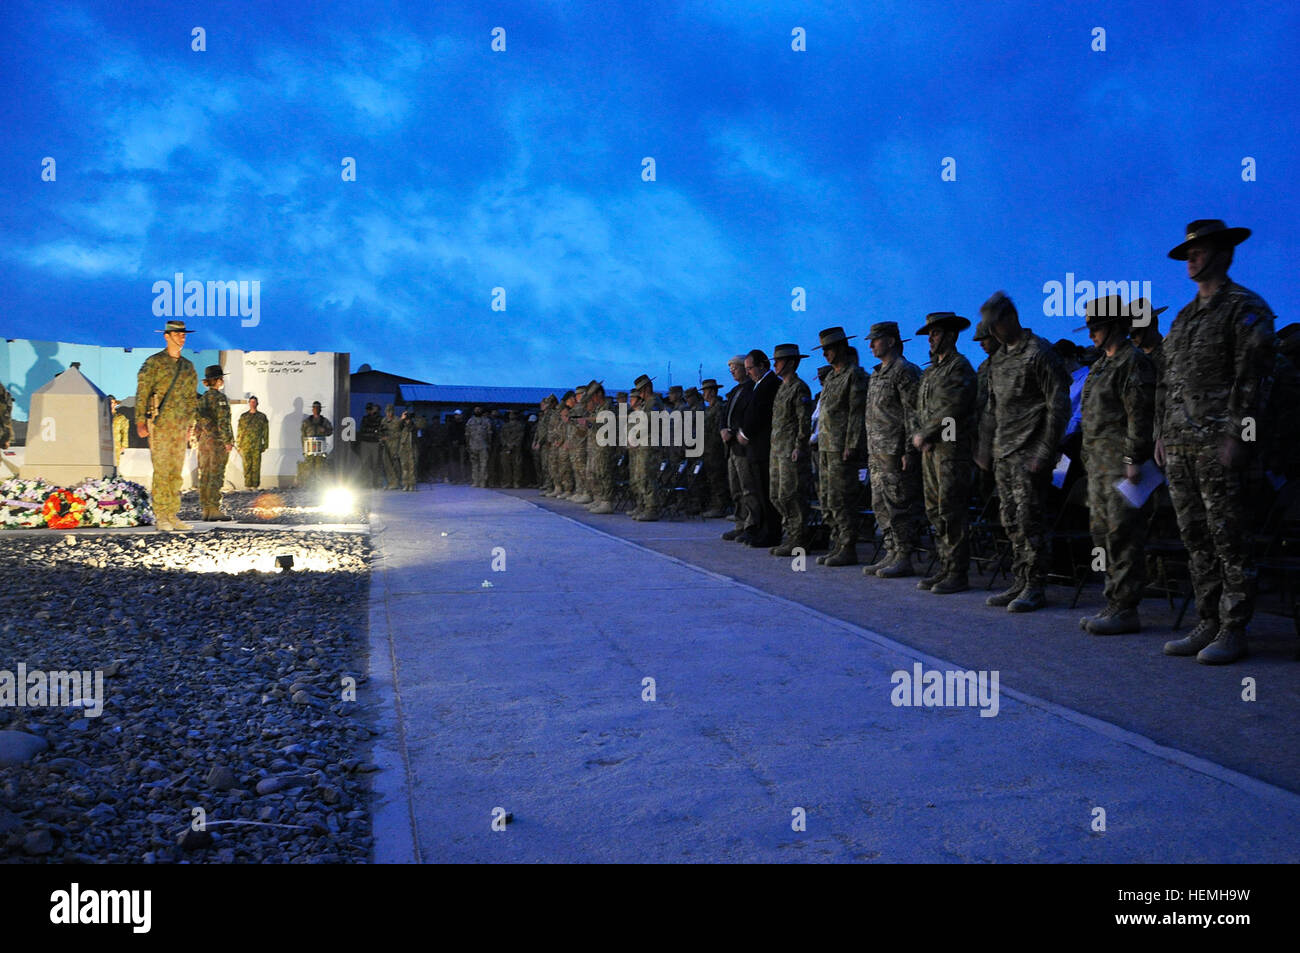 Australian troops, along with their coalition partners, bow their heads during the ANZAC Day dawn service at Multi-National Base Tarin Kot, Afghanistan, April 25, 2013. Australia and New Zealand Army Corps Day marks the beginning of the Battle of Gallipoli and is commemorated annually as a day of remembrance for those who made the ultimate sacrifice. (U.S. Army photo by Sgt. Jessi Ann McCormick) US troops participate in Australian Defence Force day of remembrance 130425-A-FS372-348 Stock Photo